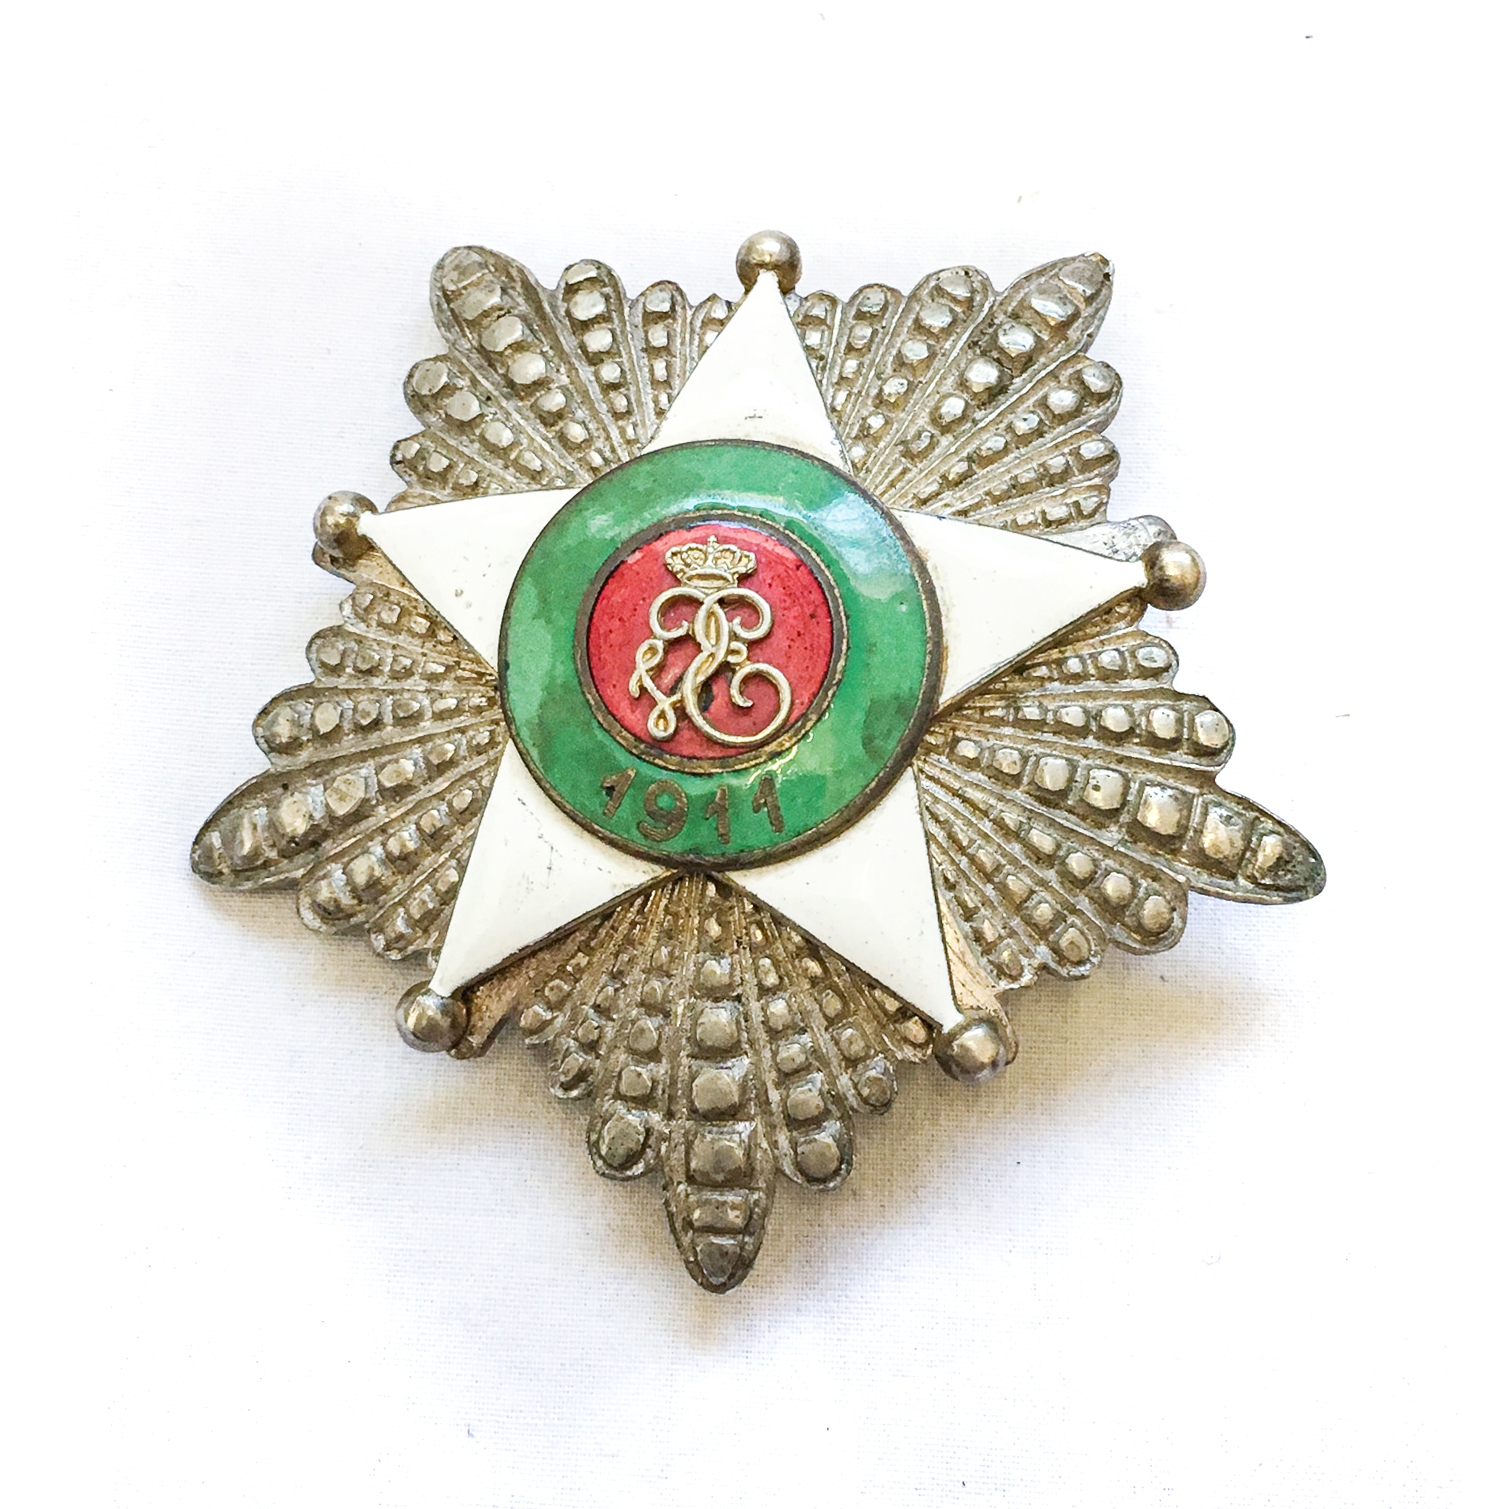 AN ITALIAN COLONIAL ORDER OF THE STAR OF ITALY (GRAND OFFICER) The Colonial Order of the Star of